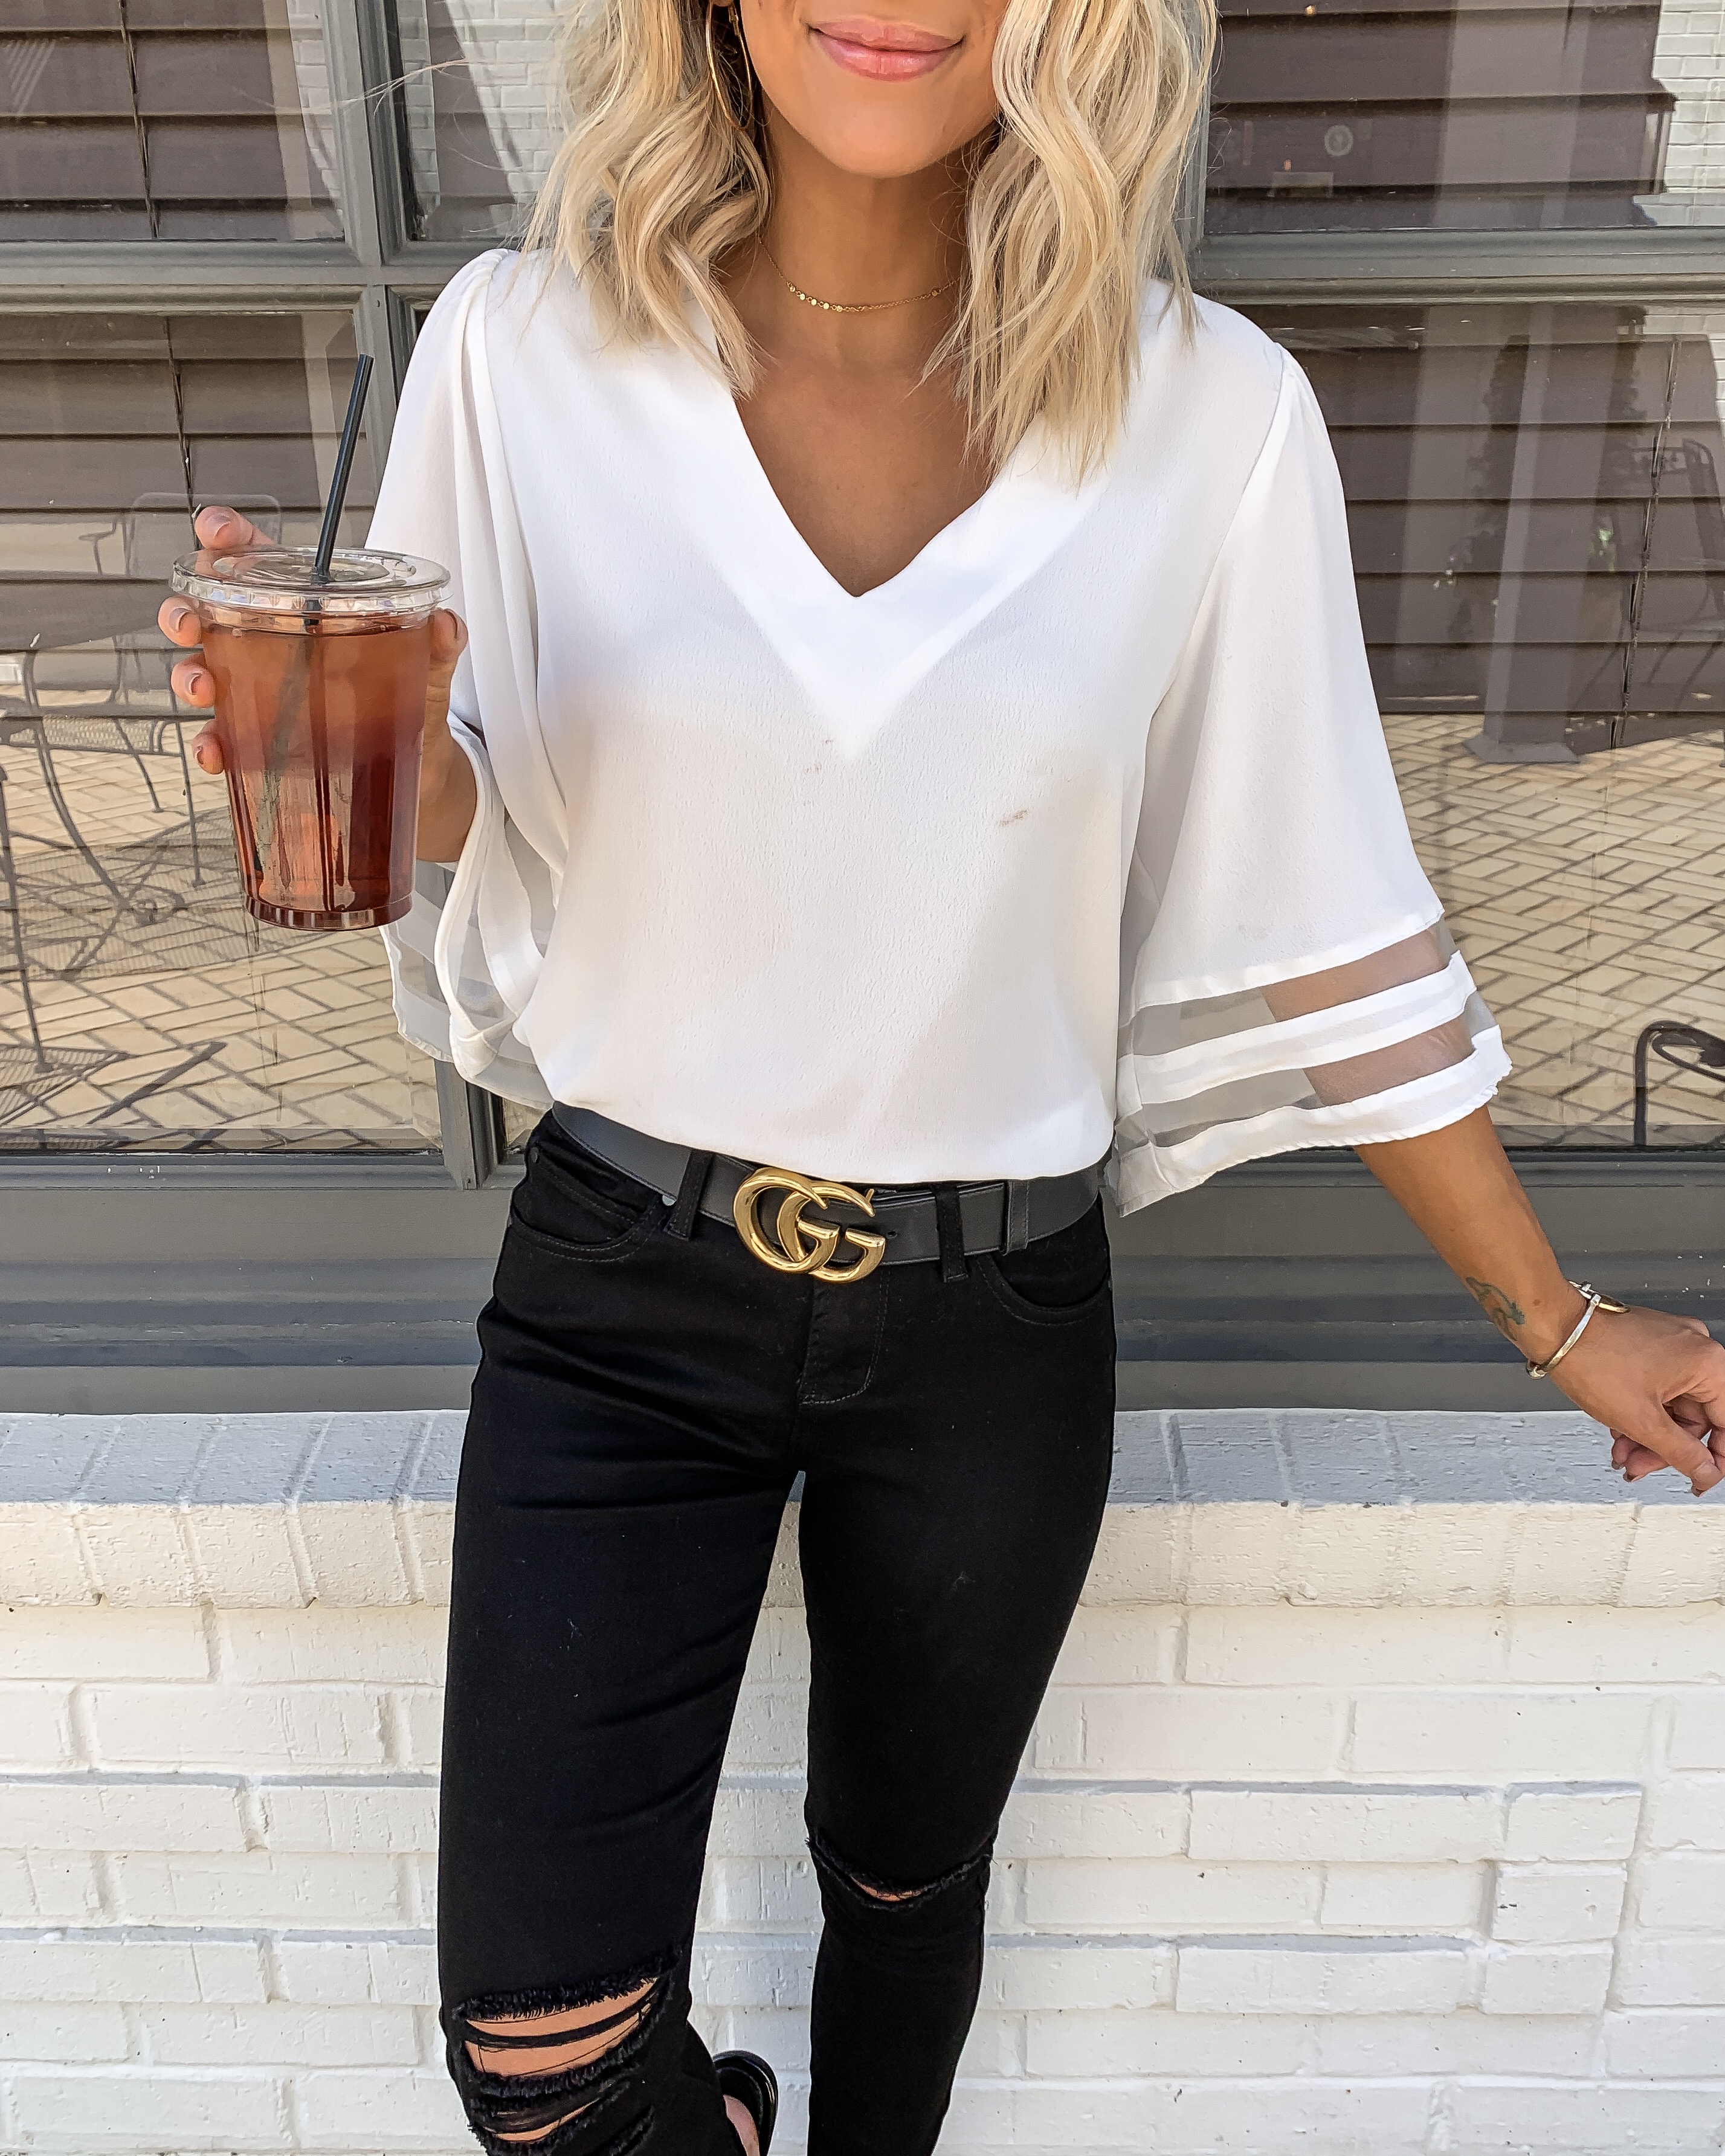 White flowy top Black skinny jeans gucci belt black tory burch millers amaryllis short hair outfit Laura Beverlin3